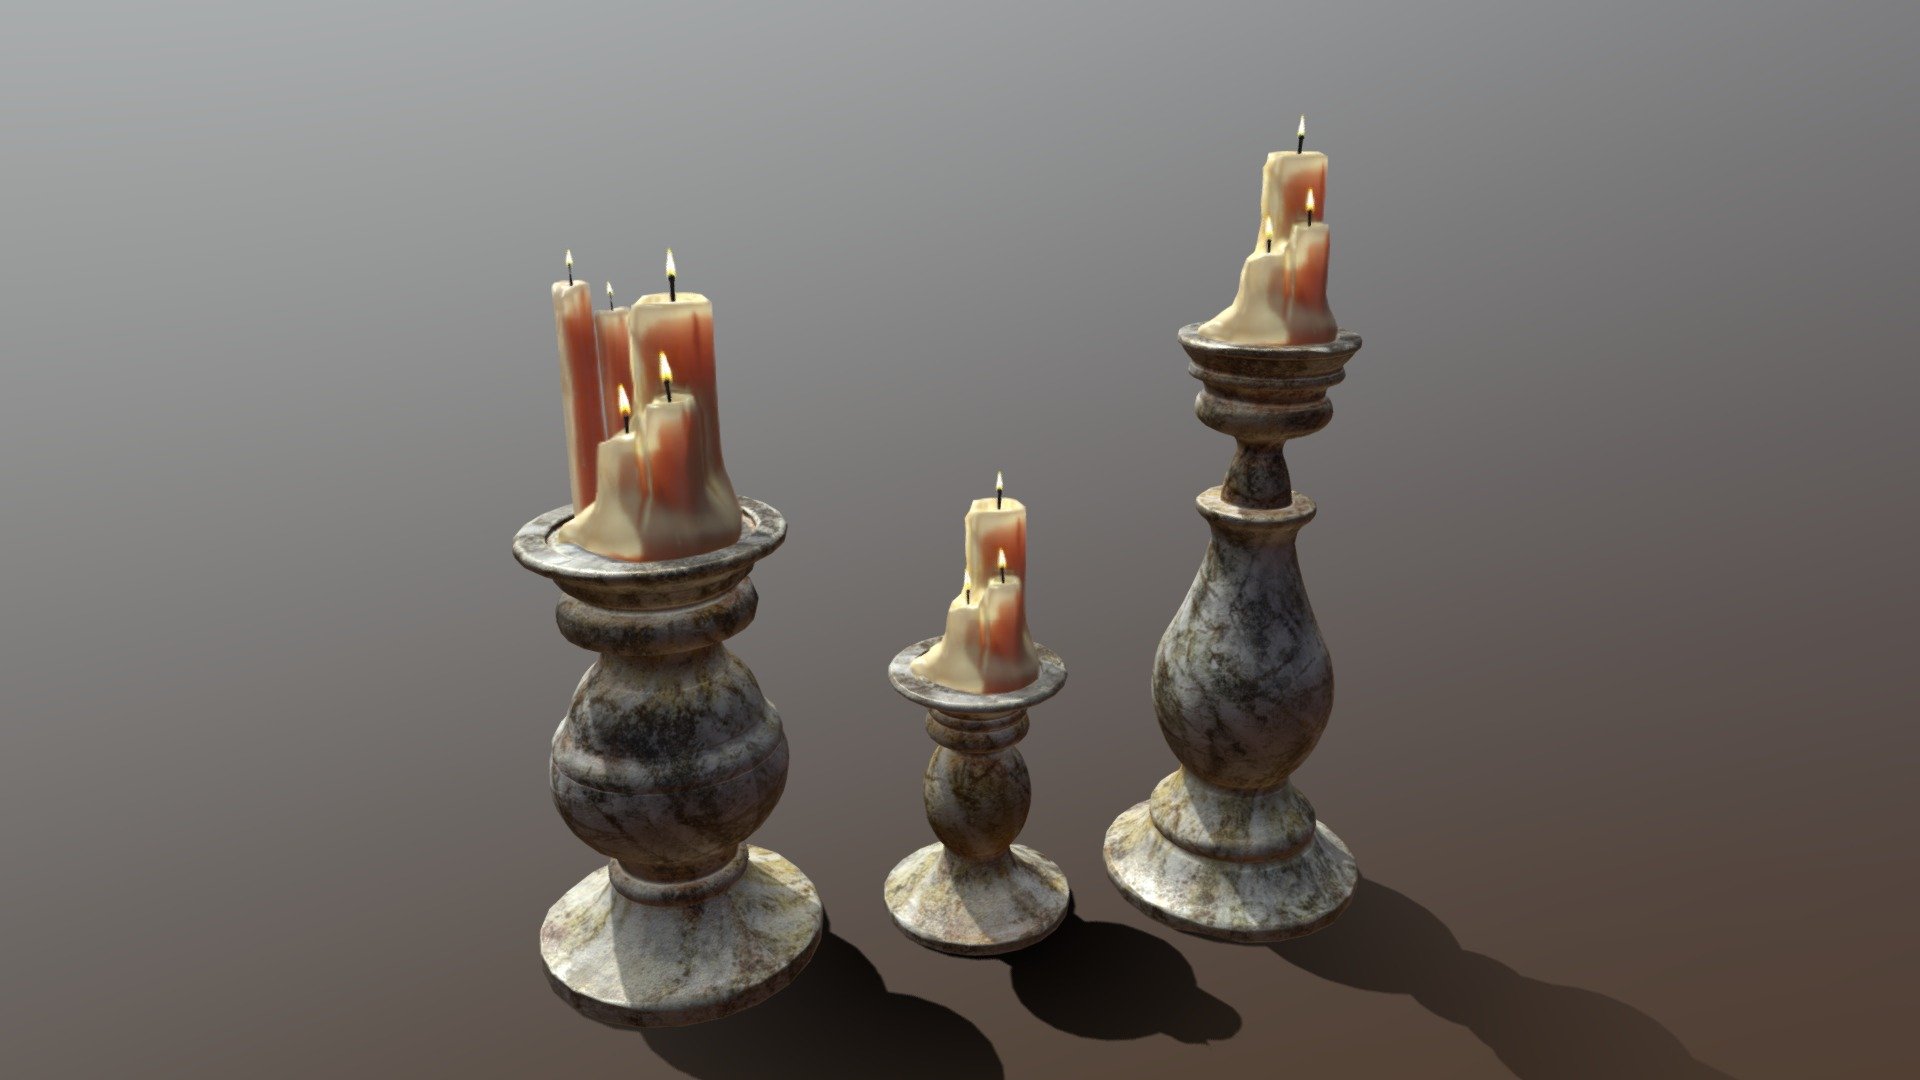 Lilac Marble CandleHolders 3D Model. This model contains the Lilac Marble CandleHolders itself 

All modeled in Maya, textured with Substance Painter.

The model was built to scale and is UV unwrapped properly. 

Contains THREE (3) Texture Sets: One for the thin candles, one for the big melted candle, and one for the Candle Holders

⦁   19053 tris. 

⦁   Contains: .FBX .OBJ and .DAE

⦁   Model has clean topology. No Ngons.

⦁   Built to scale

⦁   Unwrapped UV Map

⦁   4K Texture set

⦁   High quality details

⦁   Based on real life references

⦁   Renders done in Marmoset Toolbag

Polycount: 

Verts 9709

Edges 19271

Faces 9604

Tris 19053

If you have any questions please feel free to ask me 3d model